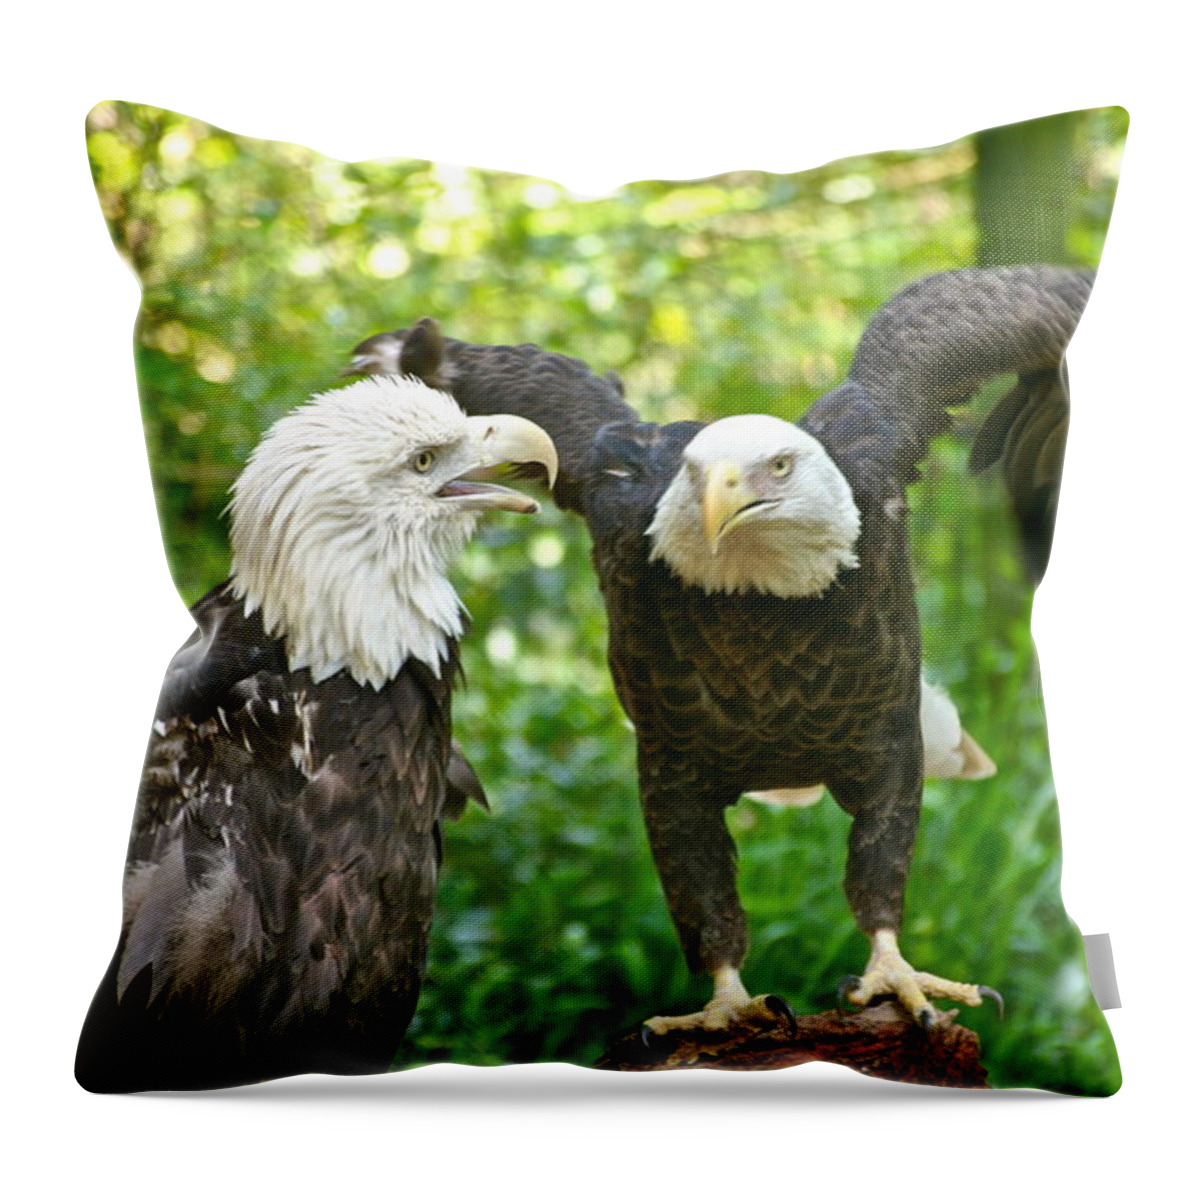 Eagle Throw Pillow featuring the photograph You Said What by Eve Spring